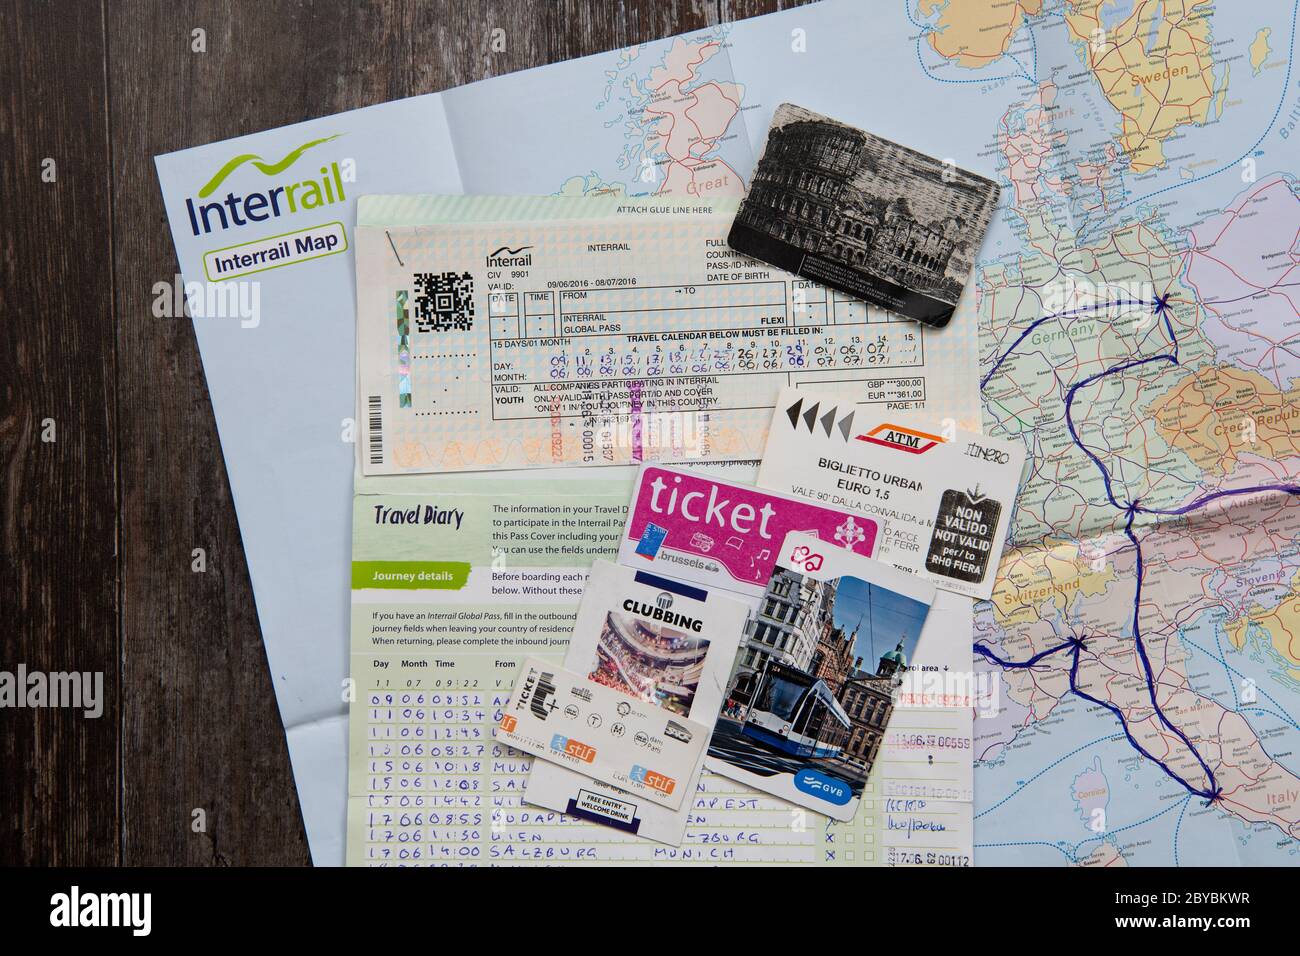 Interrail High Resolution Stock Photography and Images - Alamy